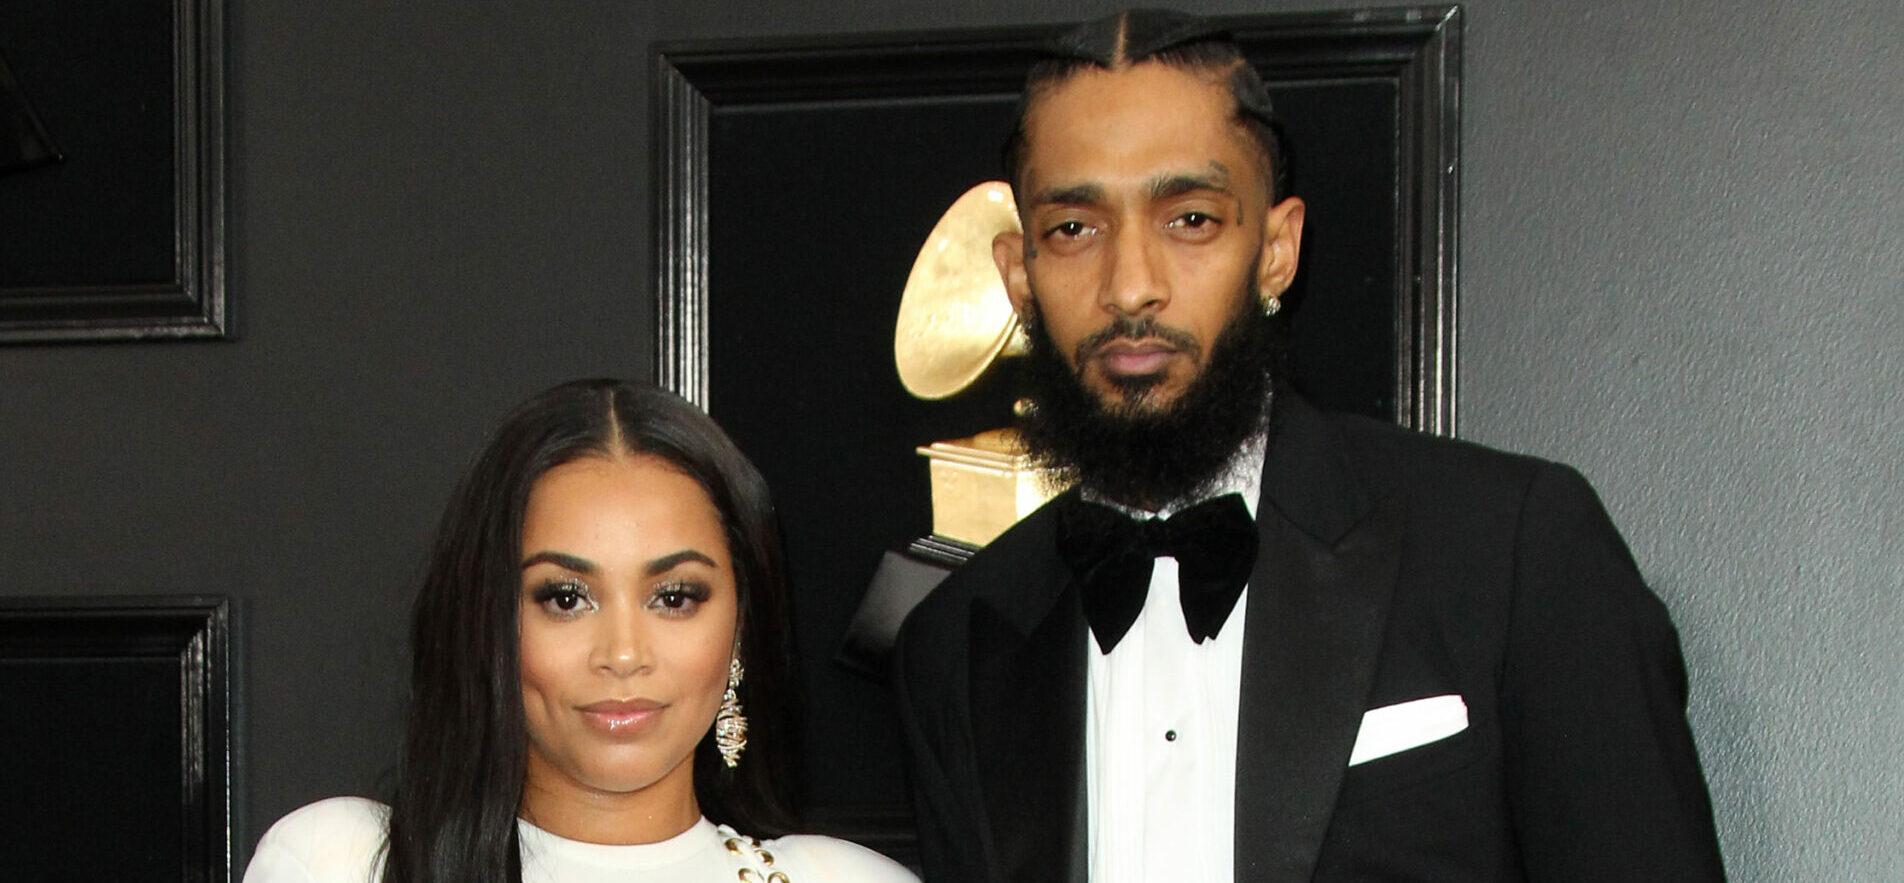 Lauren London and Nipsey Hussle at the 2019 Grammy Awards